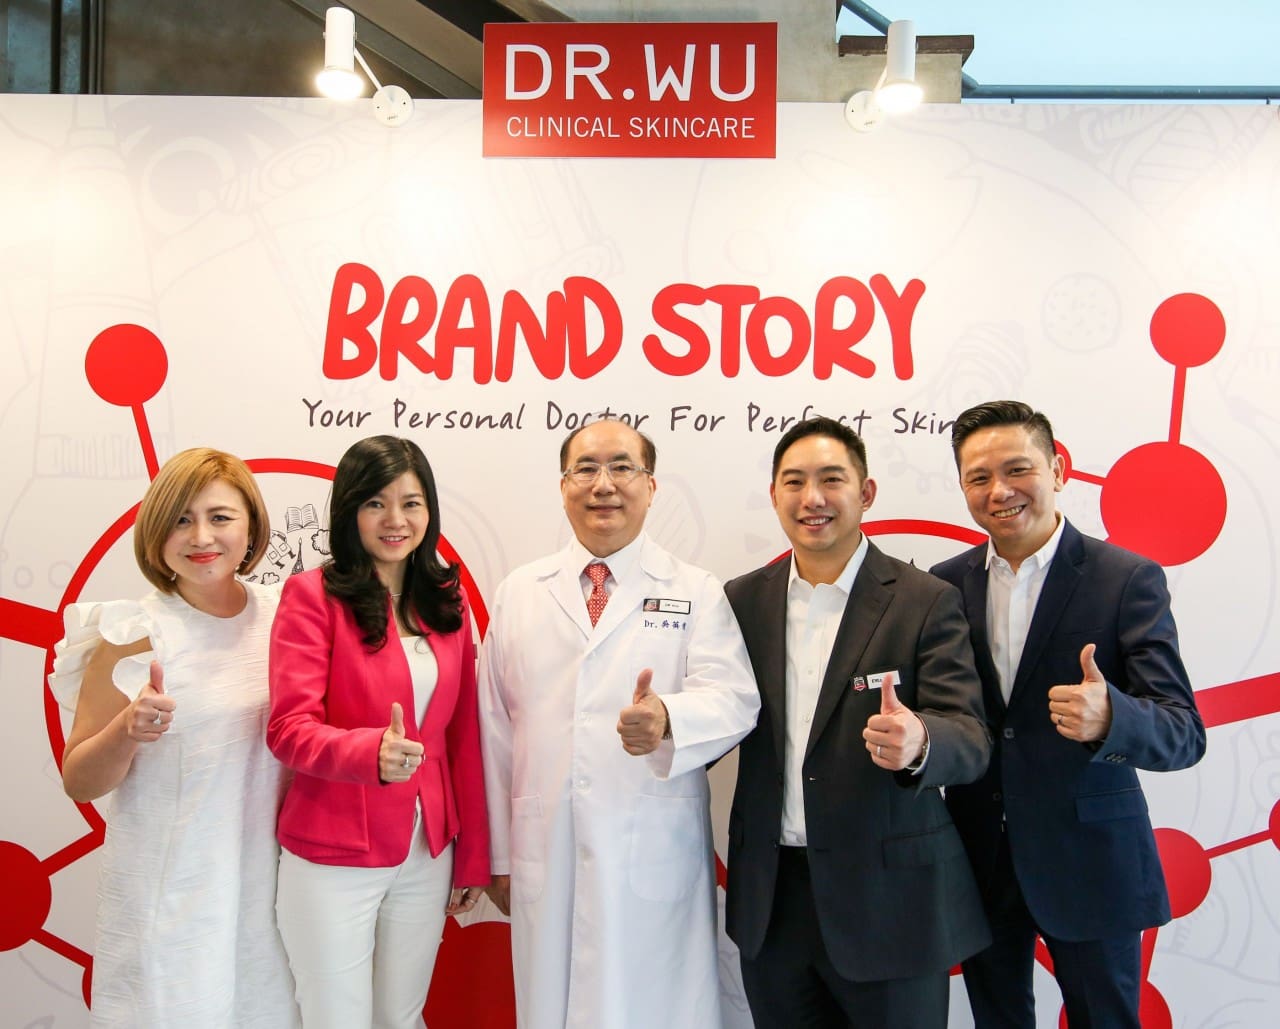 Caryn Loh Malaysias General Manager and Country Head of Watsons Malaysia in pink Dr.Wu Eric Wu and representatives from Vast Diversified the exclusive distributor of DR.WU copy